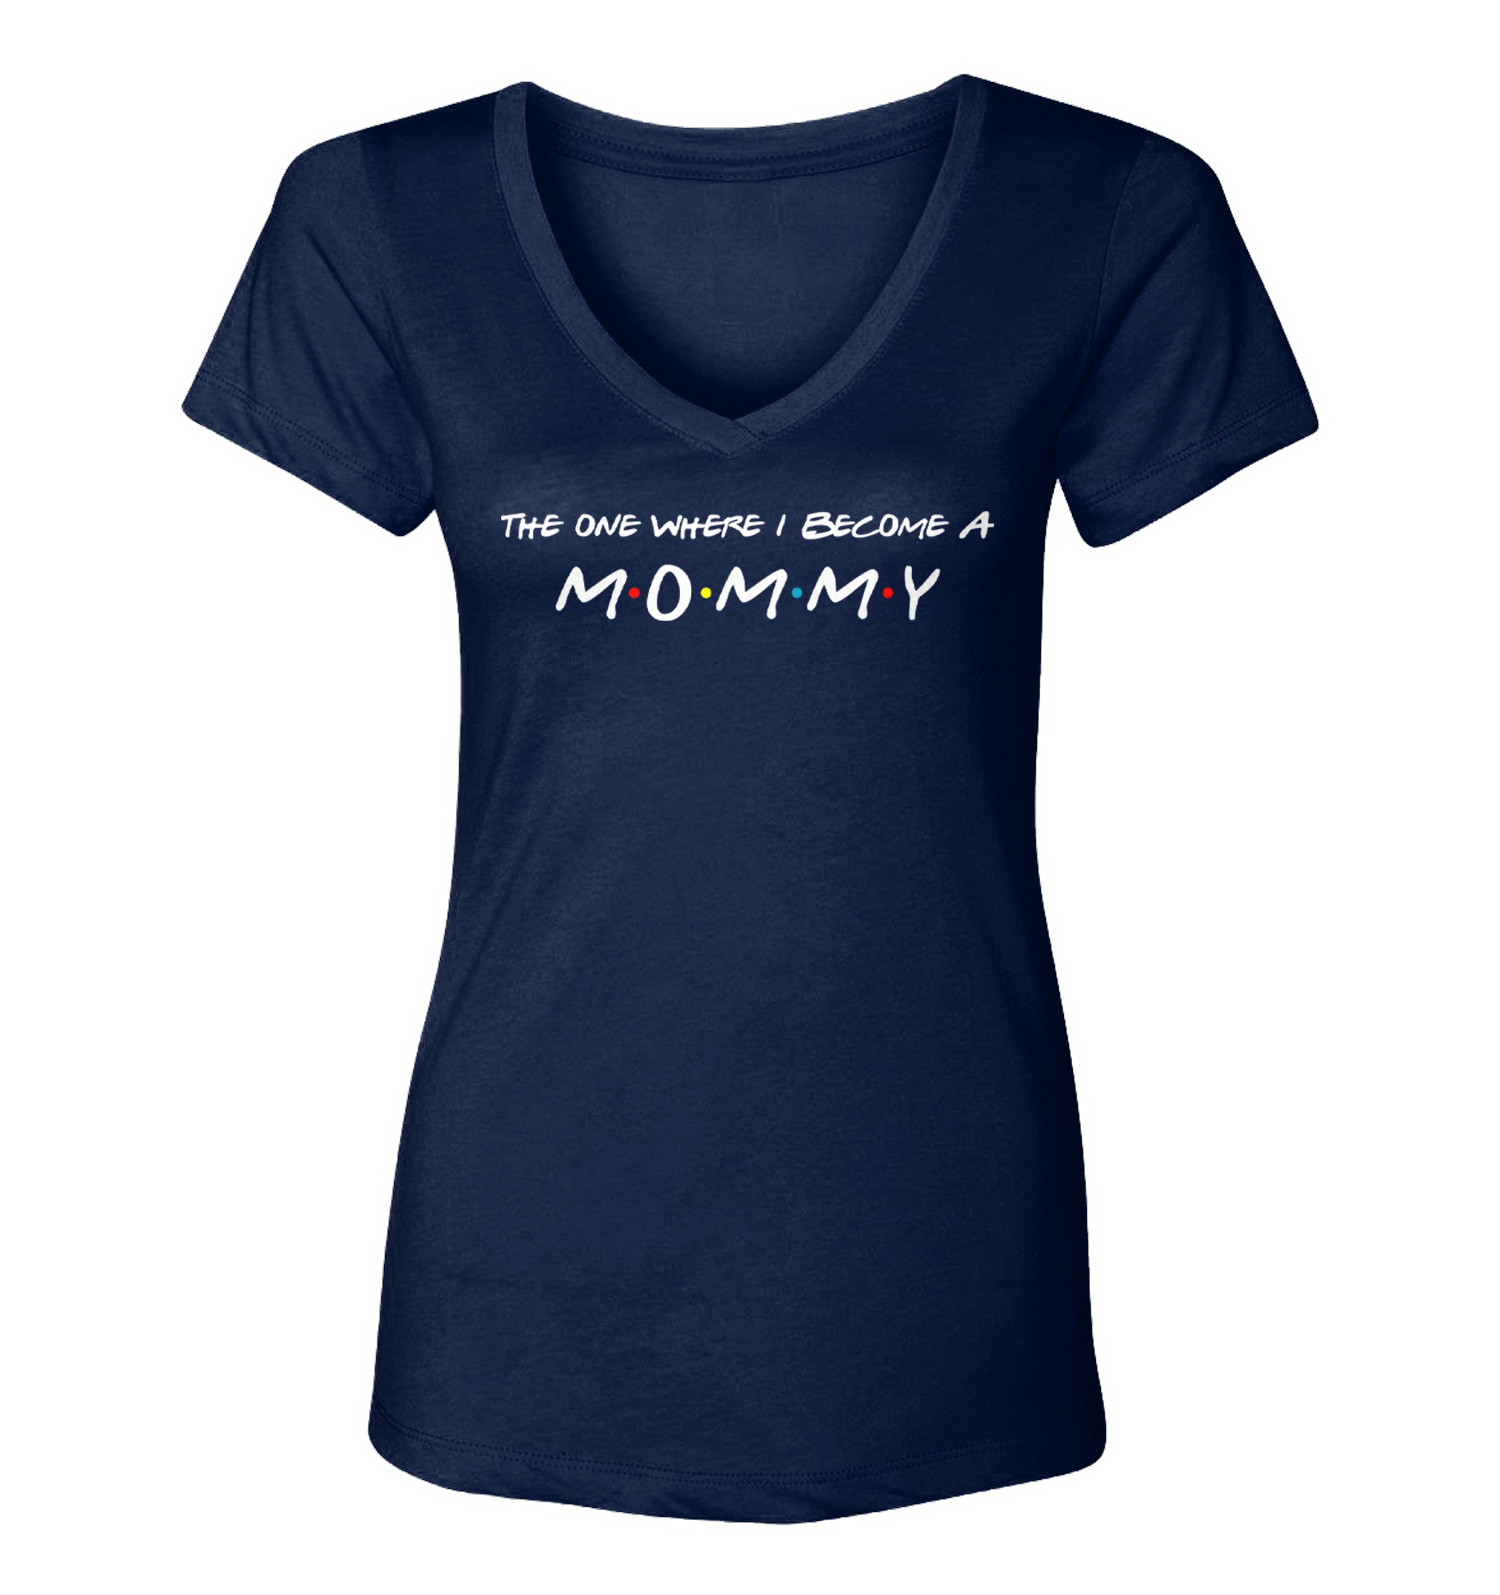 Rely on fellowship break up The One Where I Become A Mommy - Mom Mother's Day TV Women's V-Neck T-Shirt  | eBay